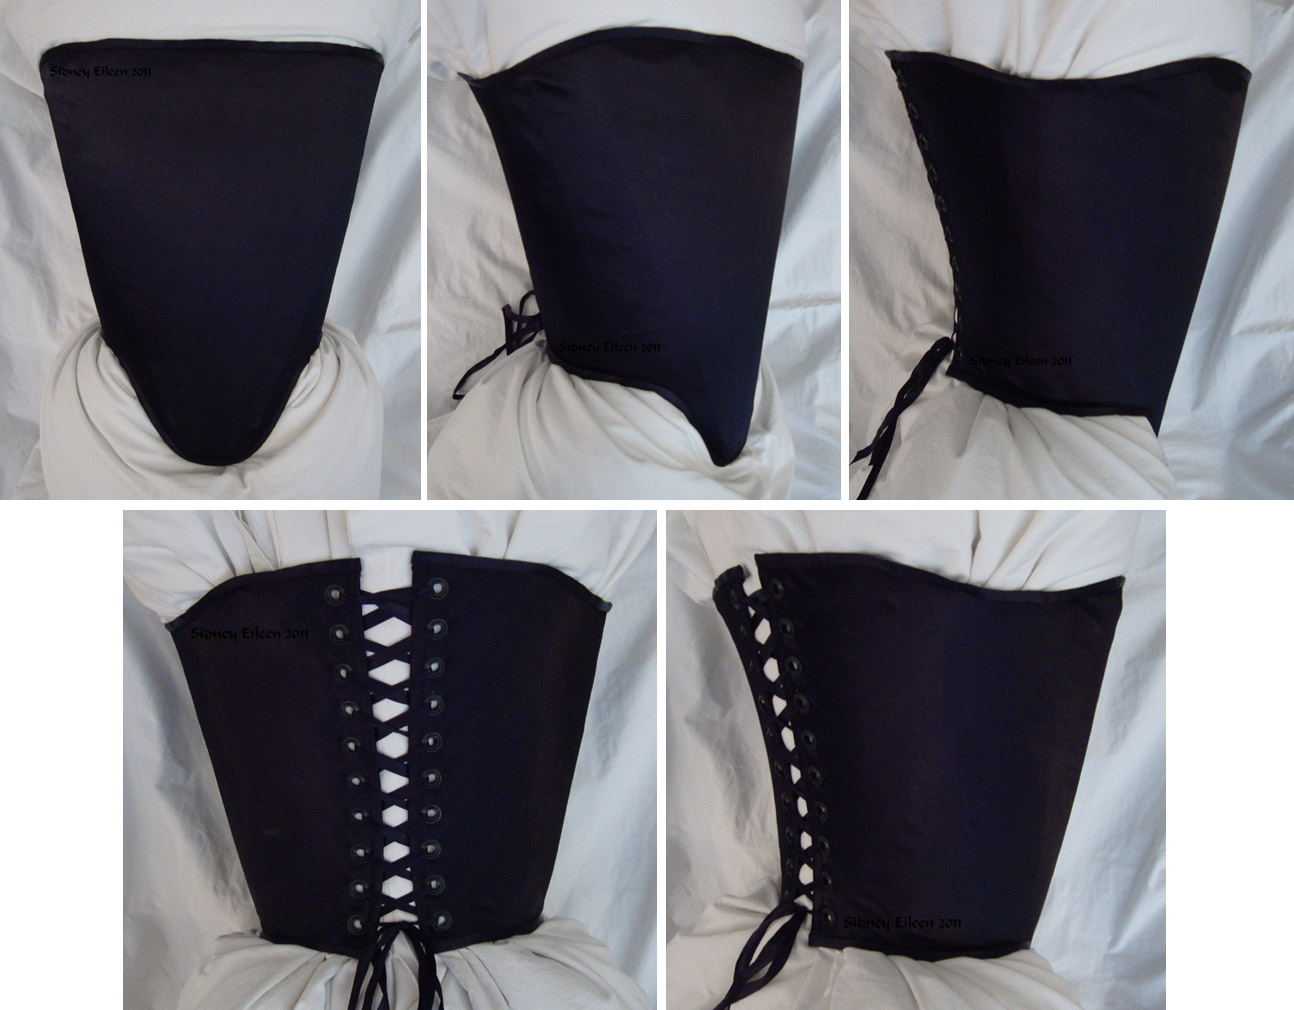 Non-Tabbed Black Satin Conical Corset - By Sidney Eileen